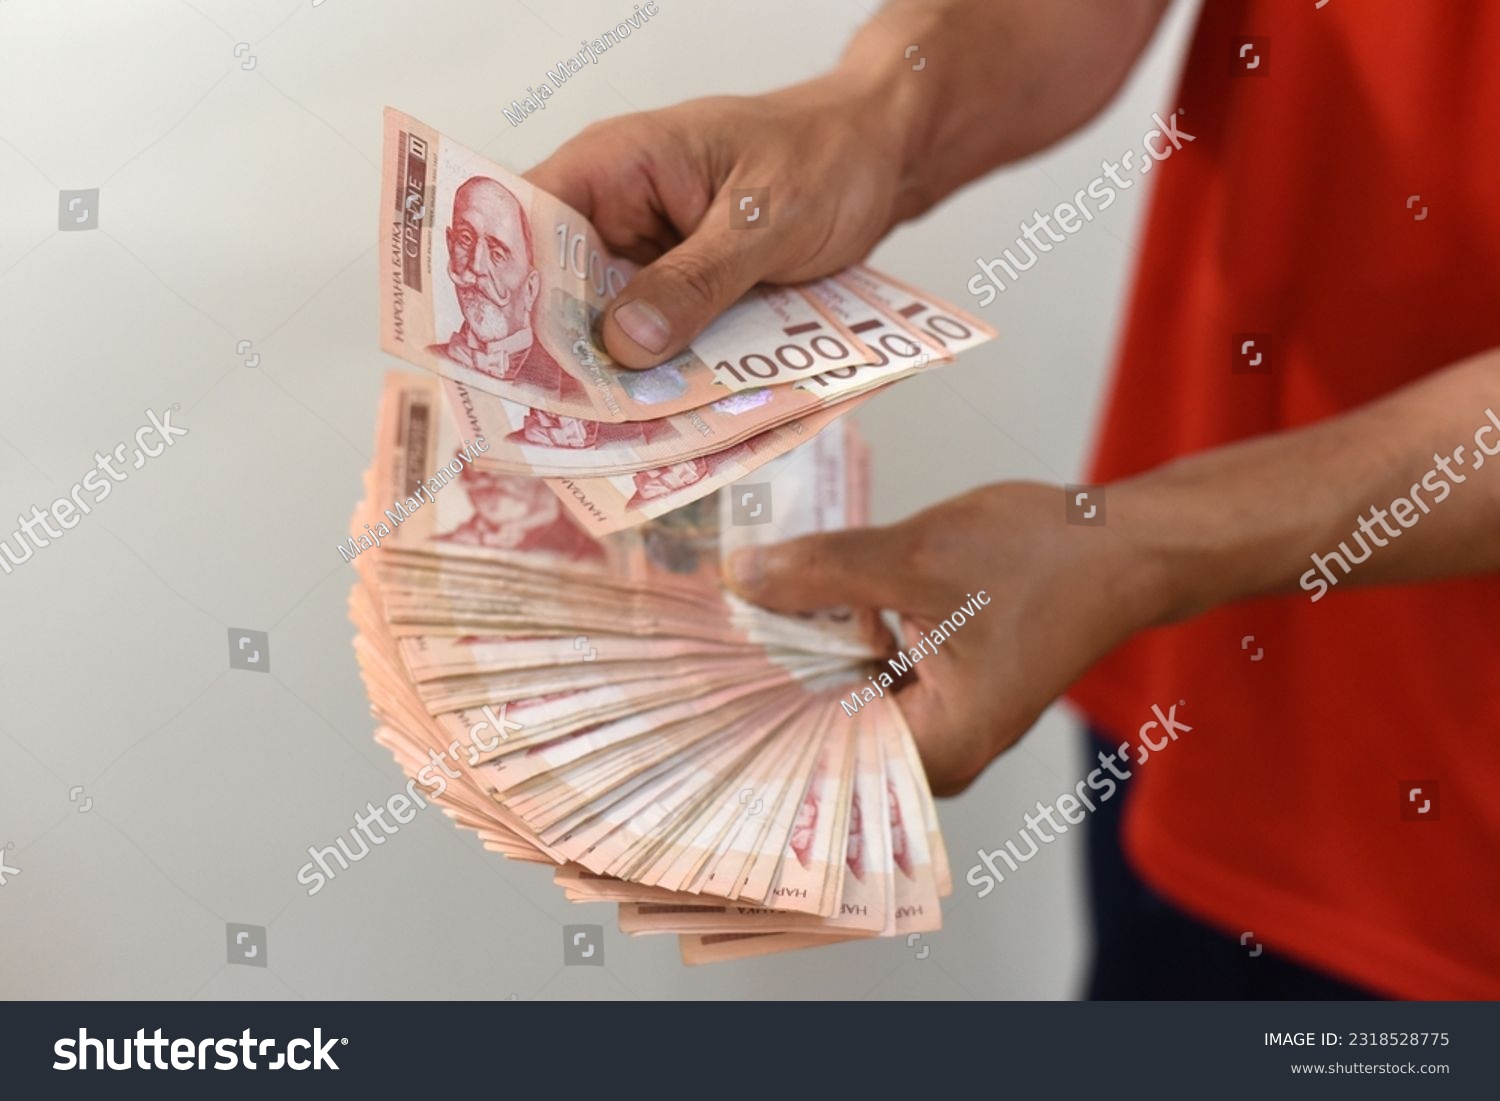 Hands holding pile of money. Serbian dinar paper currency, 1000 dinars value #2318528775